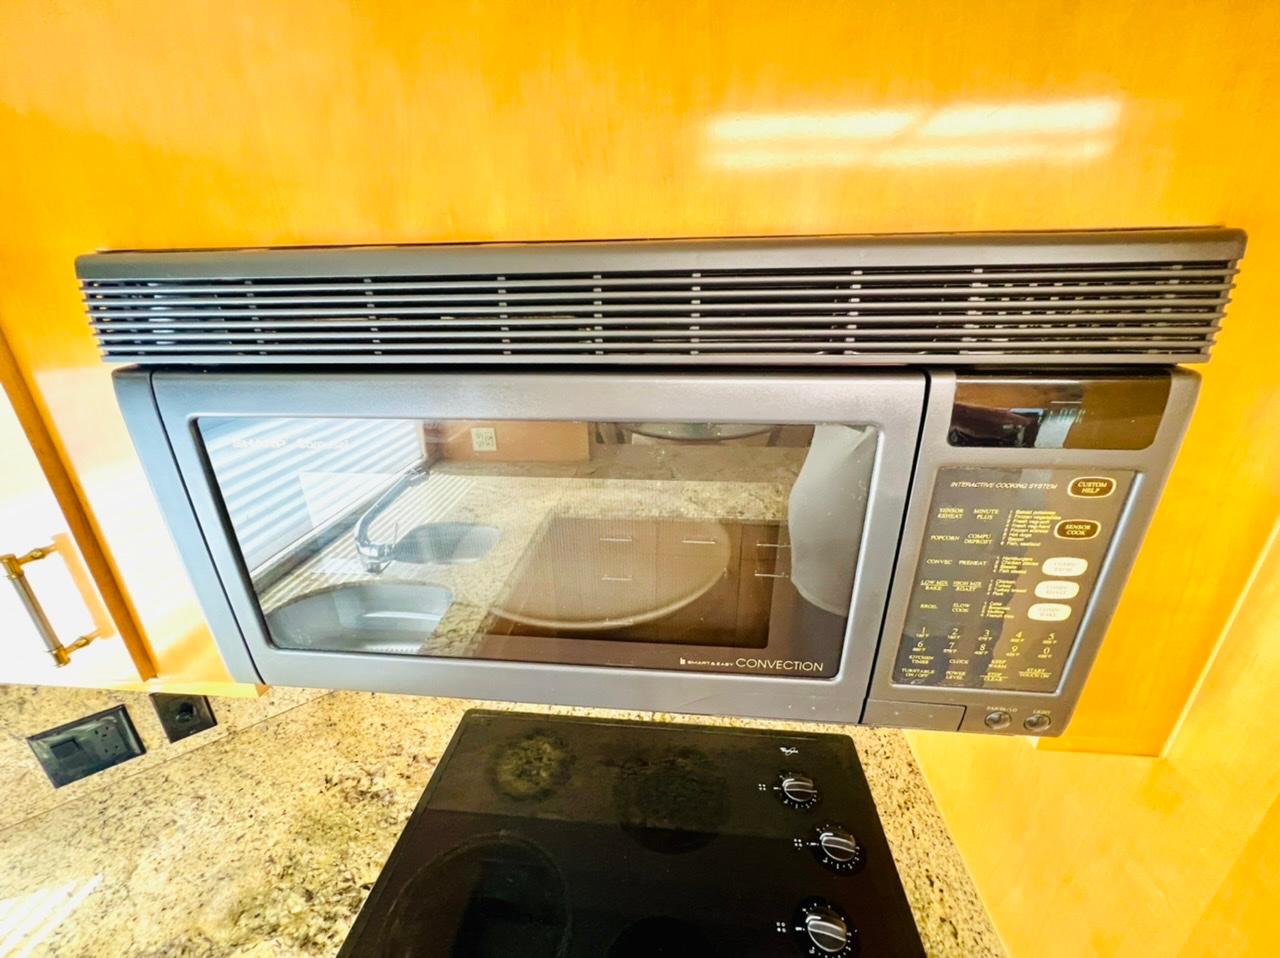 Microwave / Convection Oven